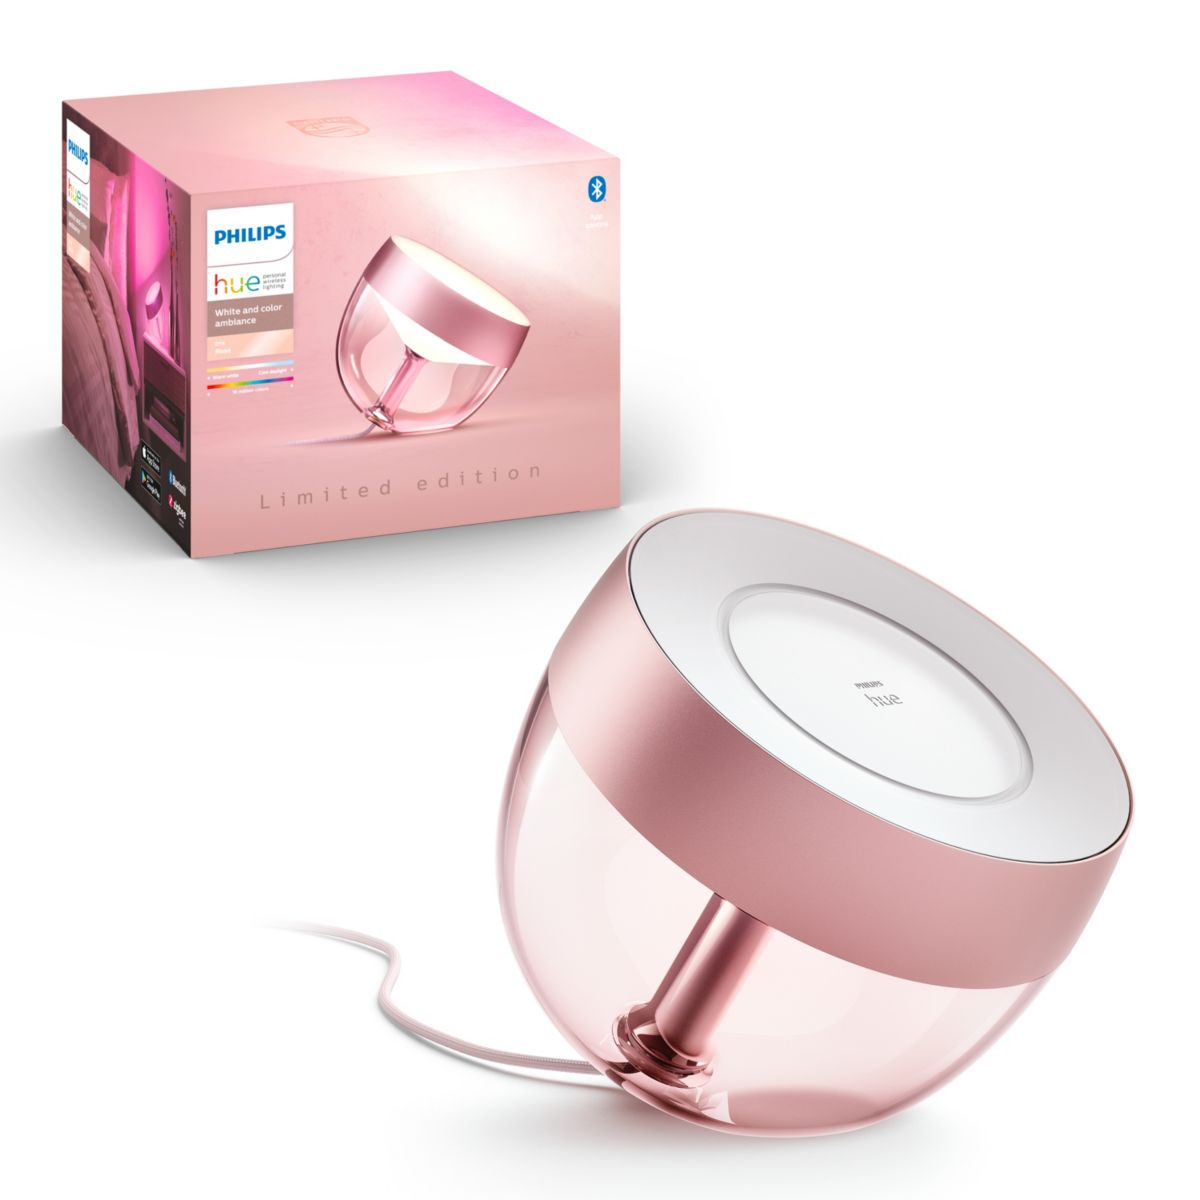 Iris rosé limited edition Philips hue White and color ambiance 8719514264502 929002376301